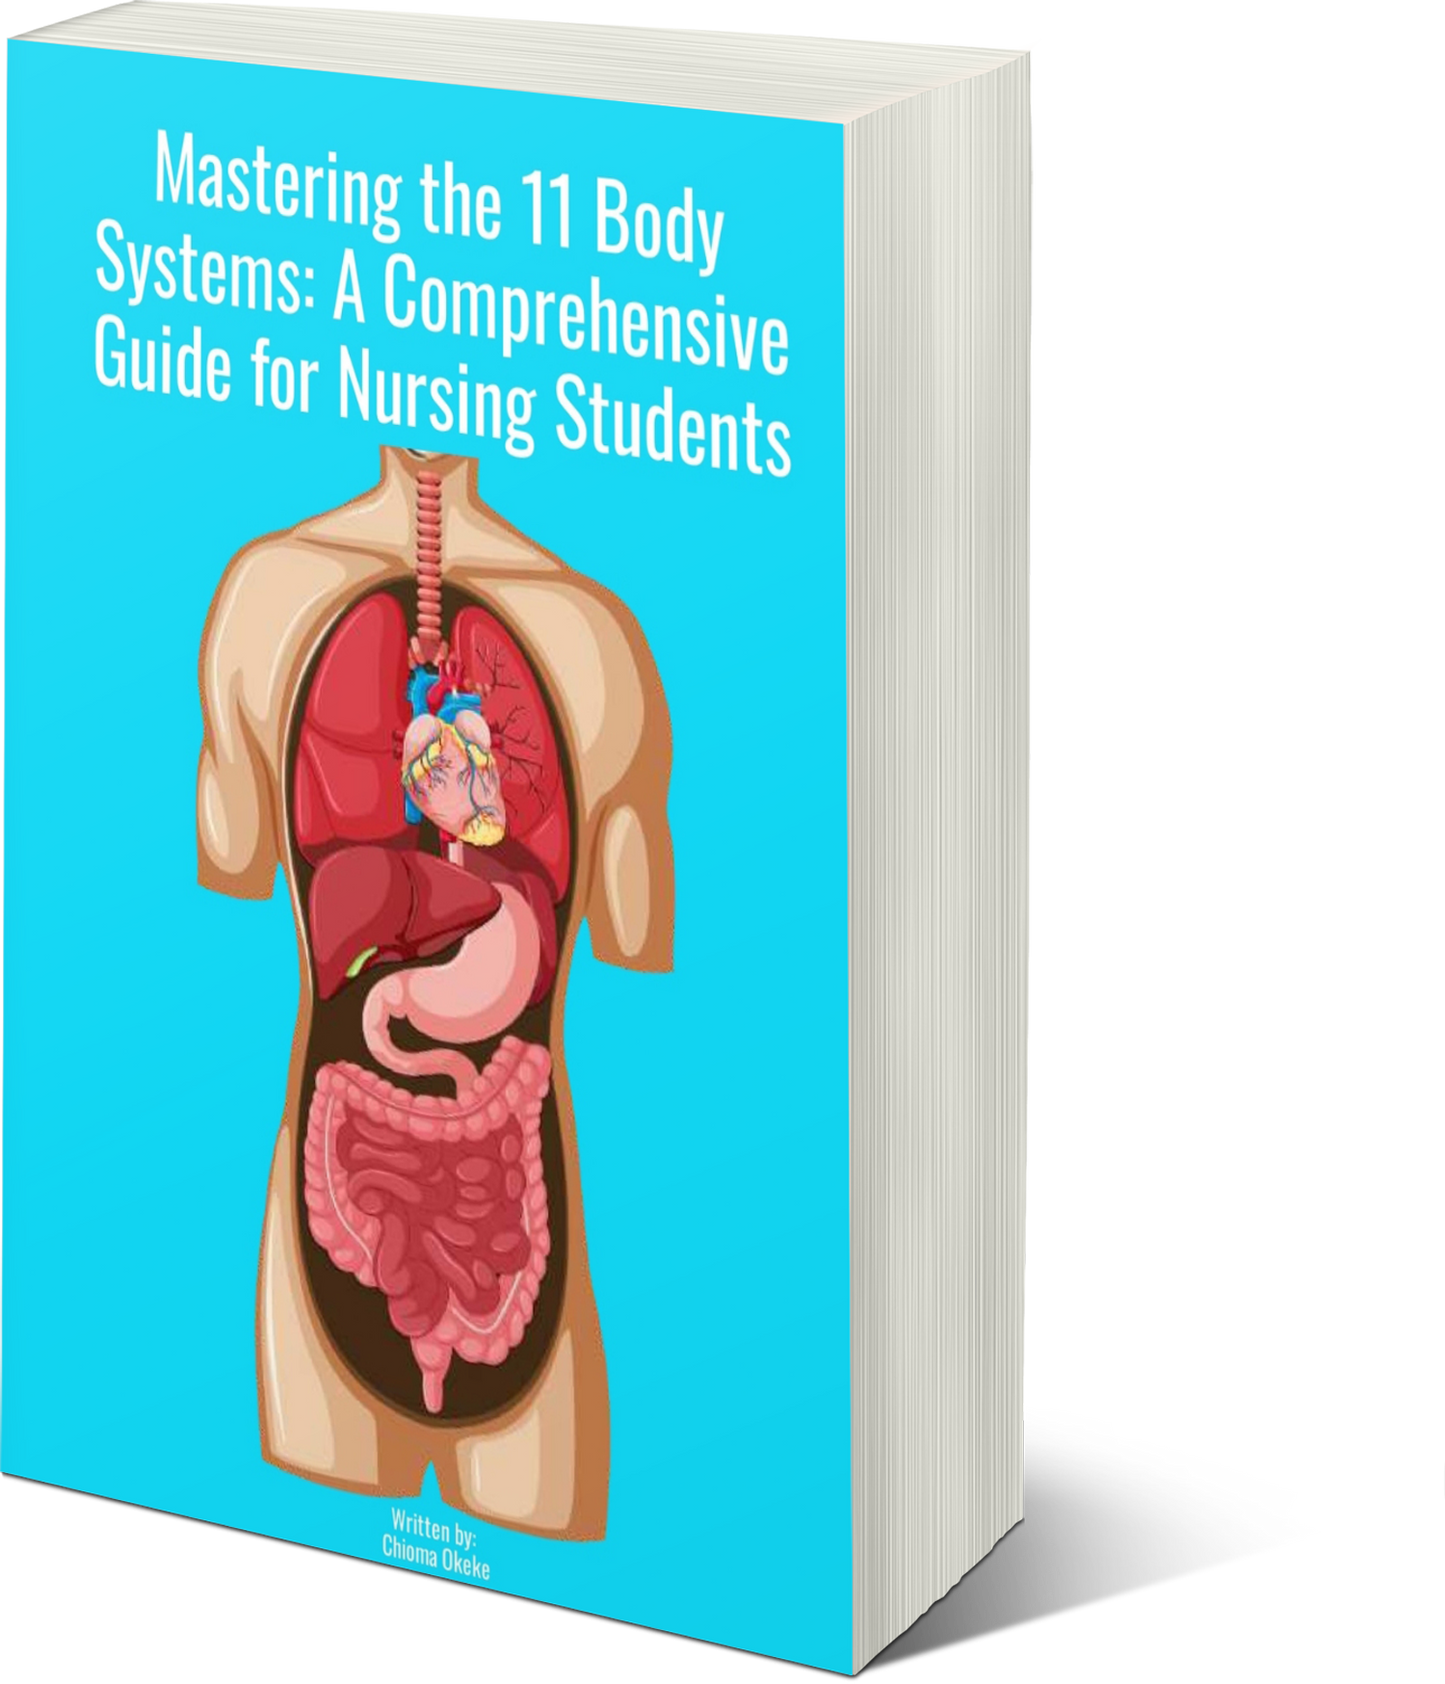 Mastering The 11 Body Systems Book (Anatomy & Physiology)